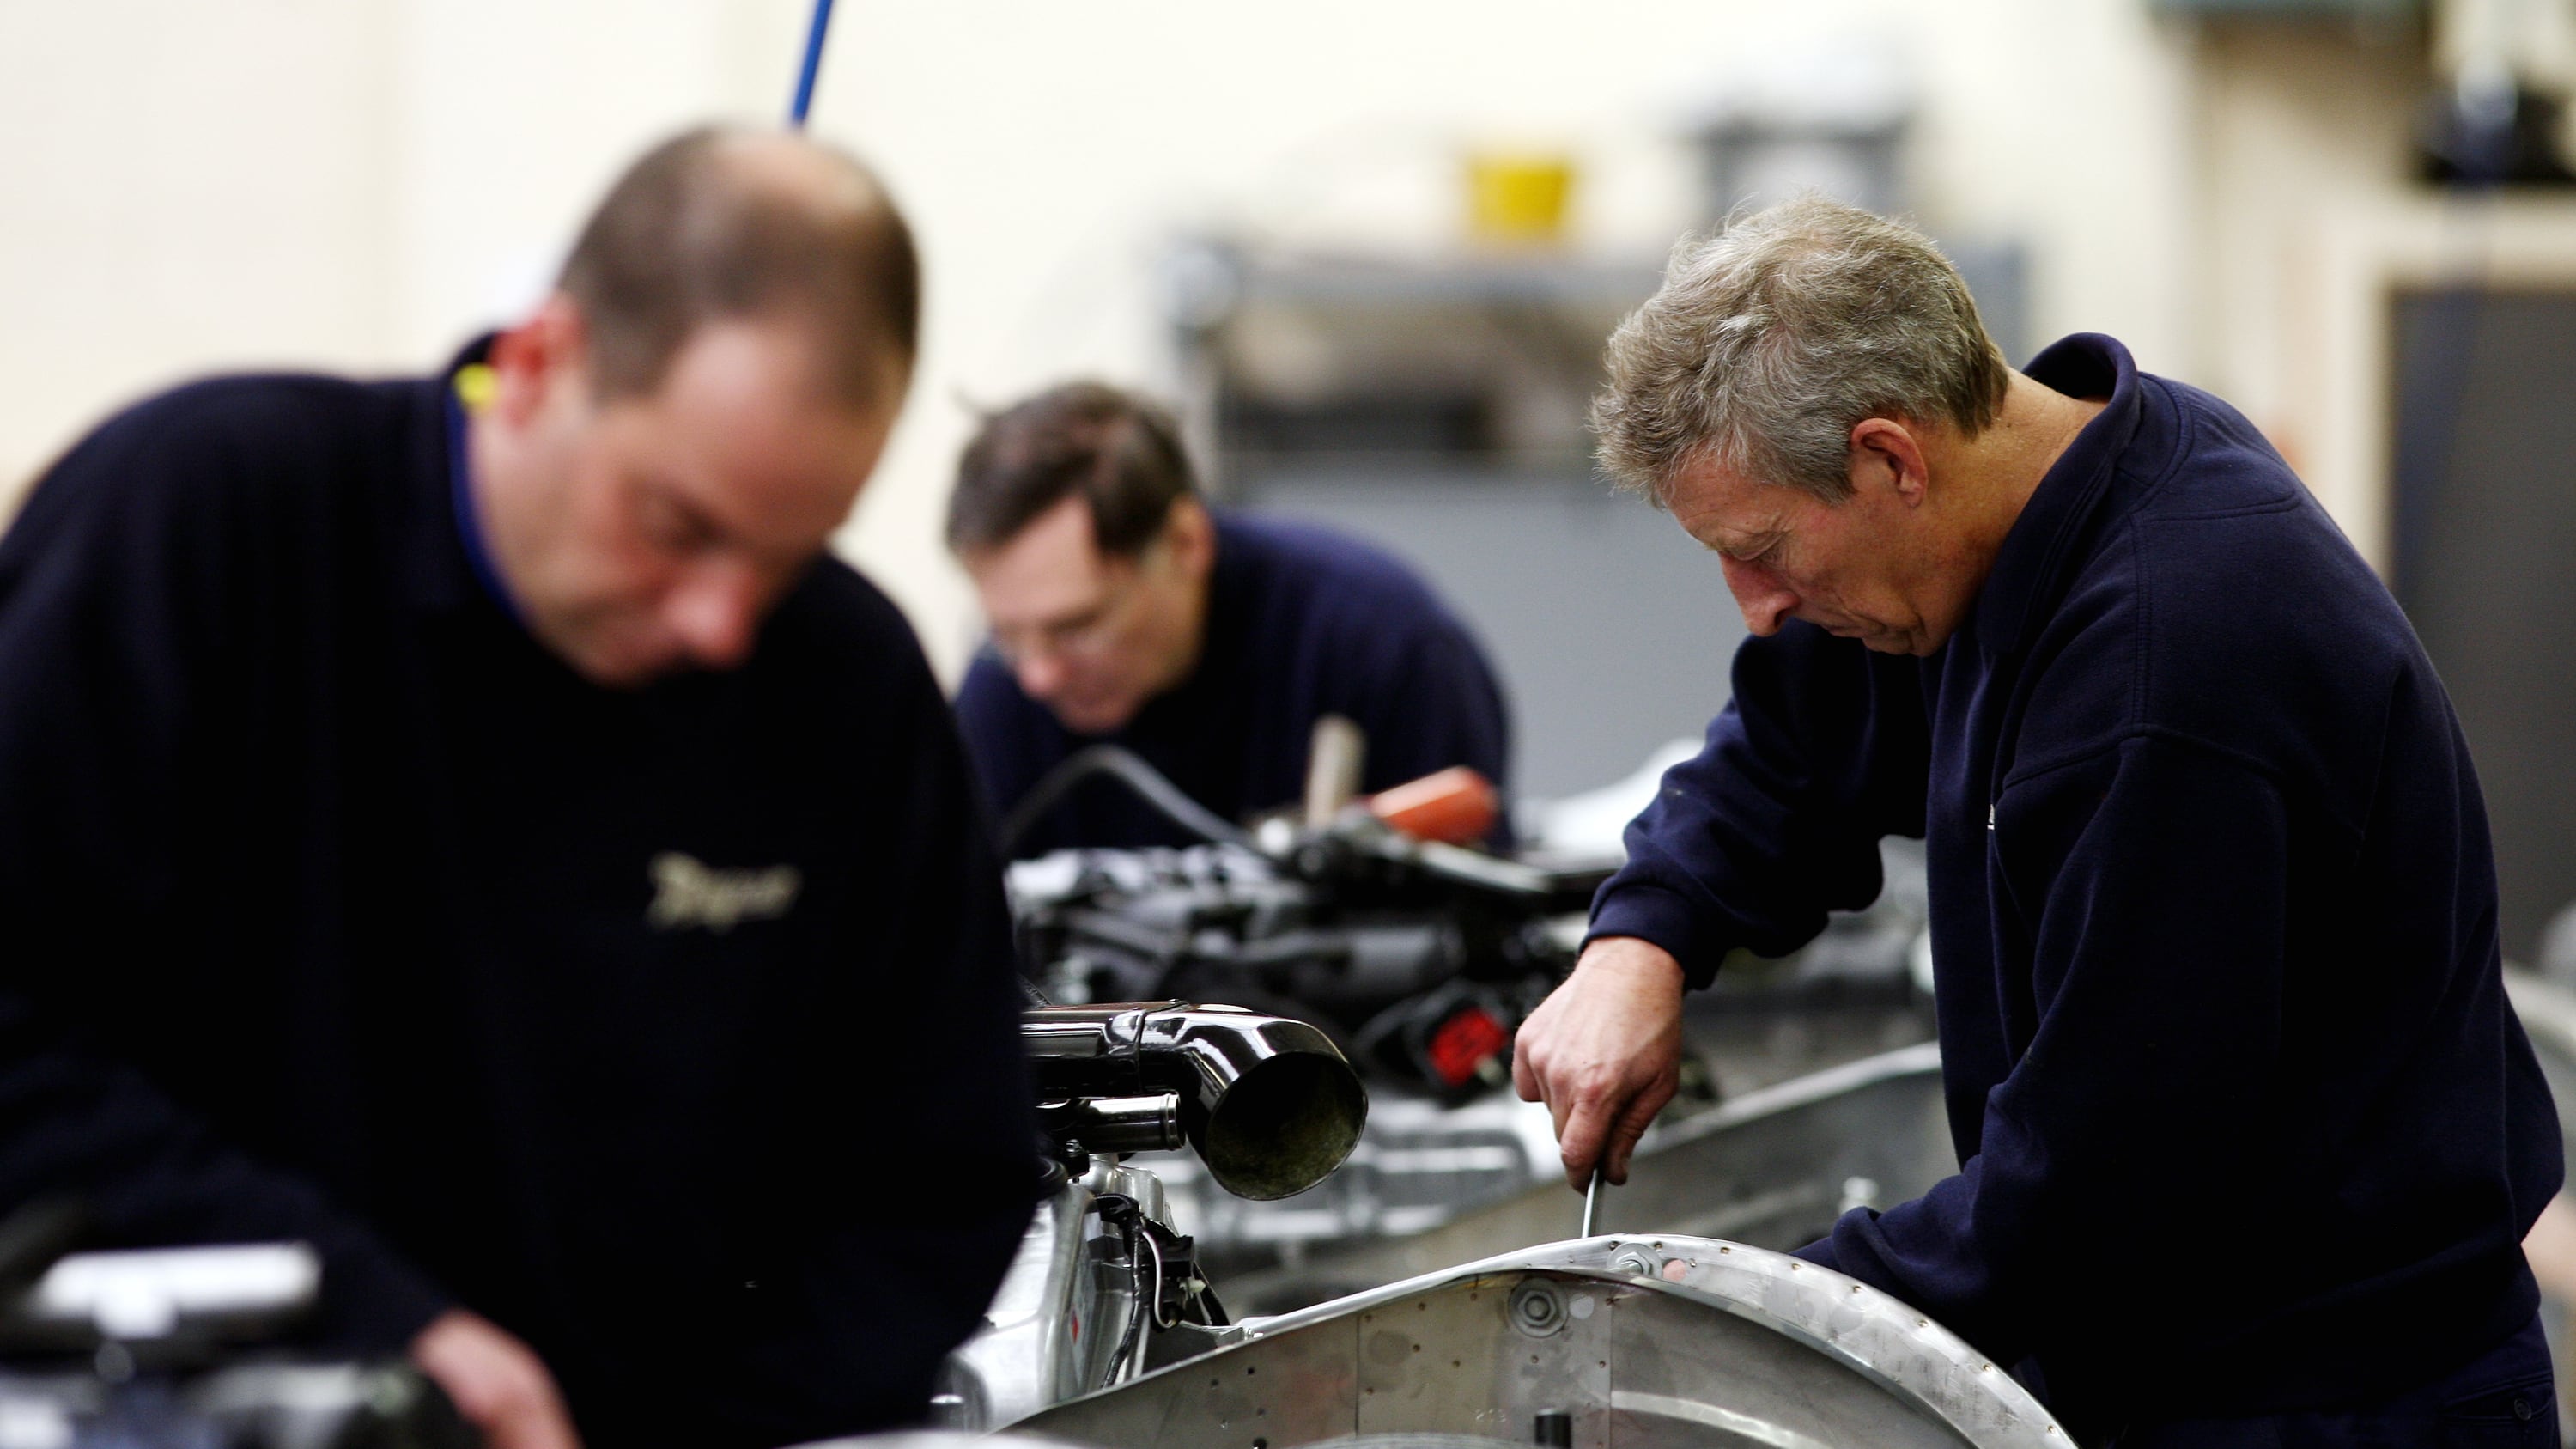 The UK’s manufacturing sector grew again in June